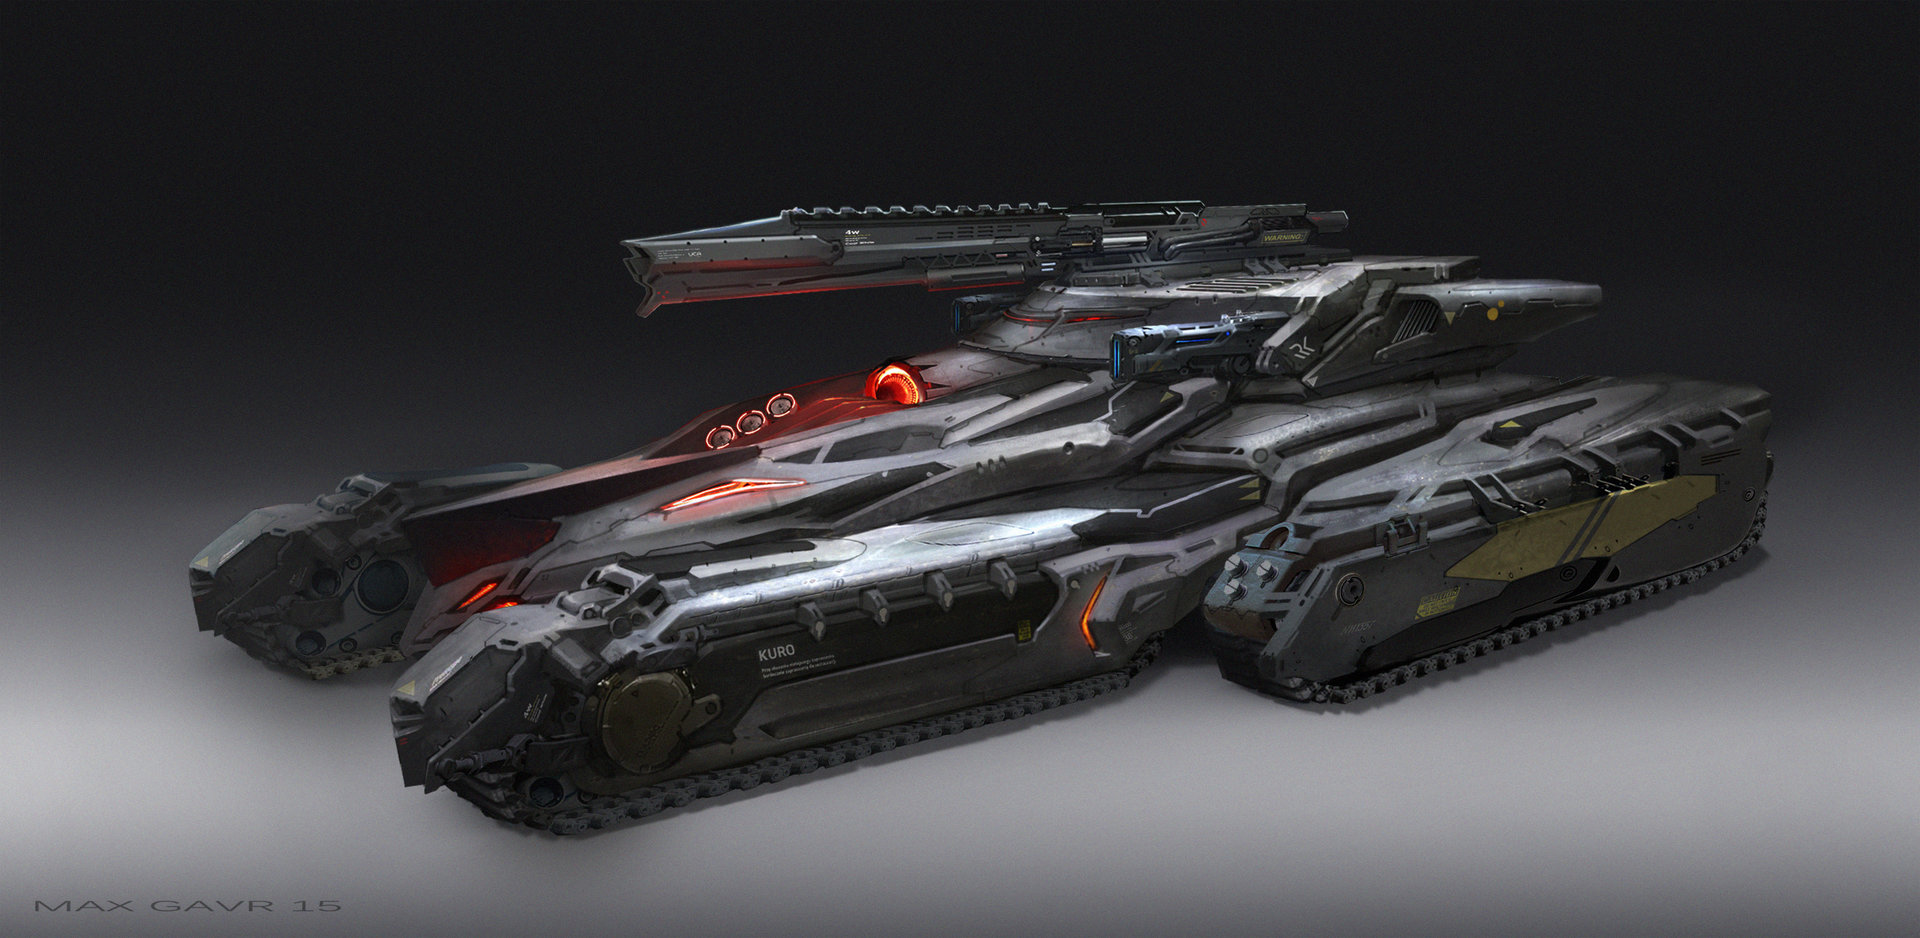 Just finished a sci-fi tank concept for secret project ) Hope you find it i...